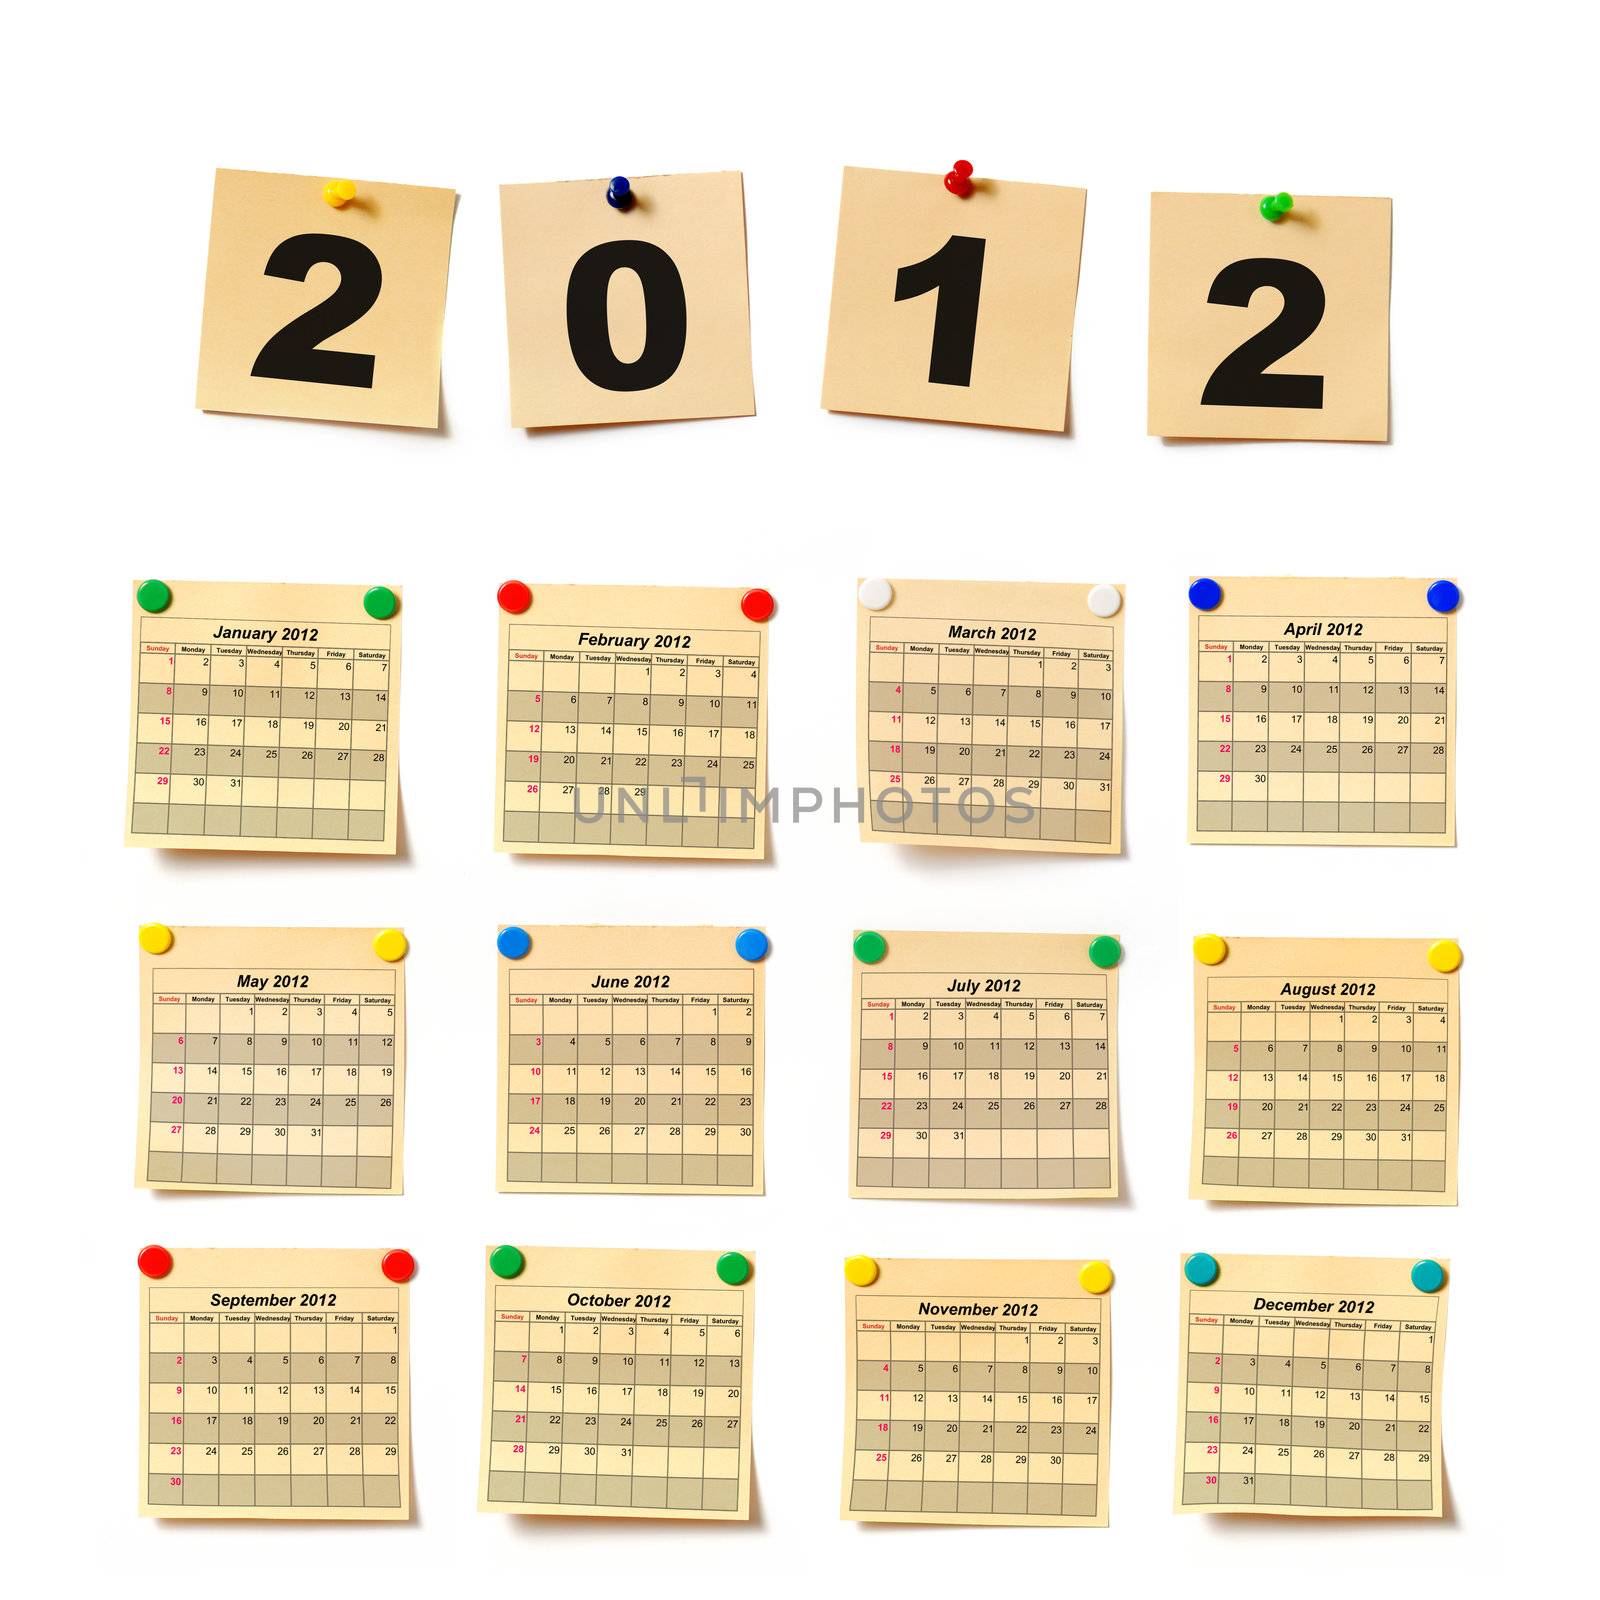 calendar on set note 2012. Paper a note attached to a wall buttons, it is isolated on a white background